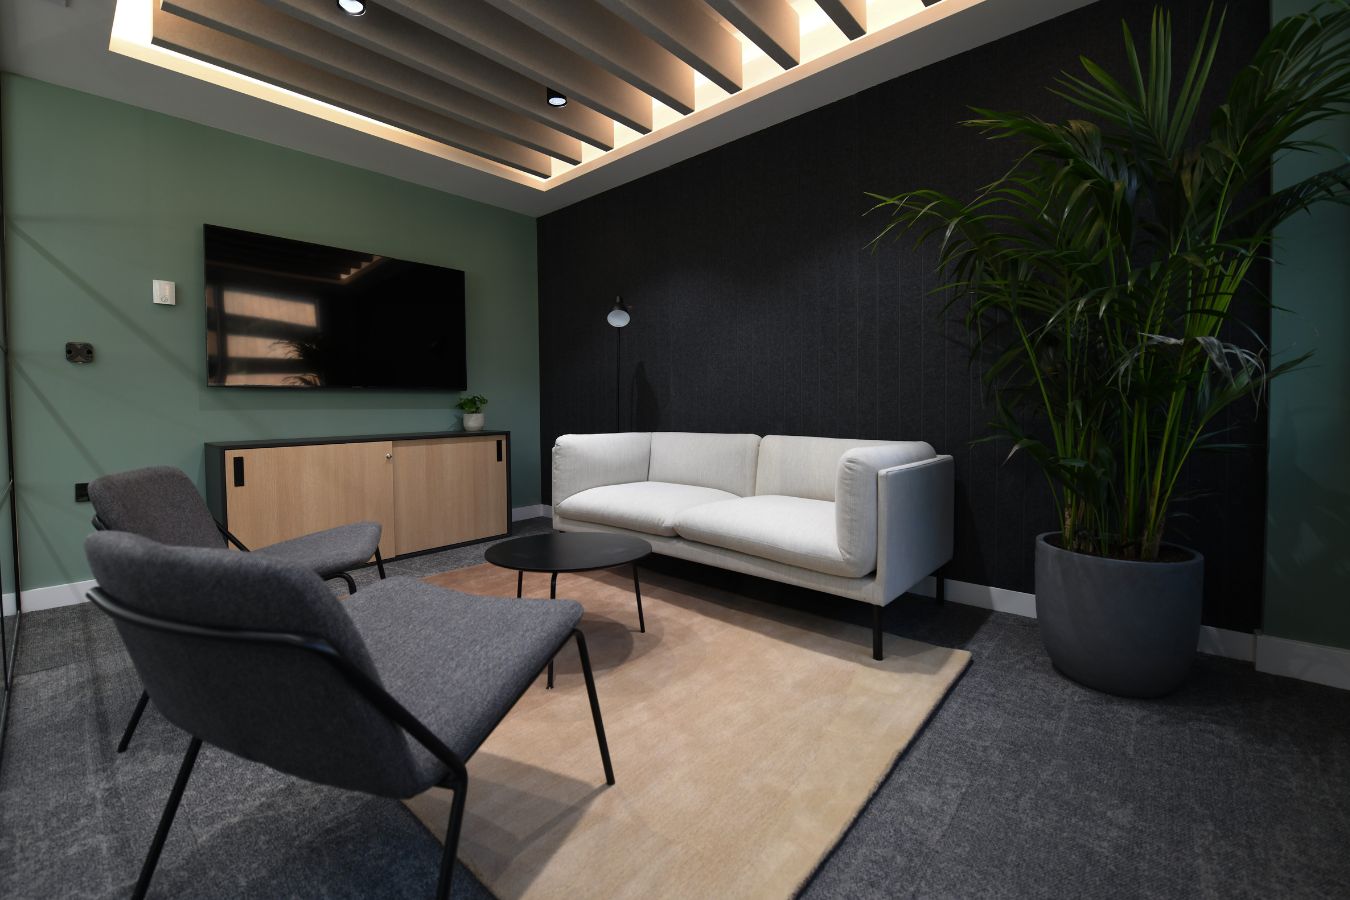 Agile seating options, a sofa and chairs in biophilic focus zone